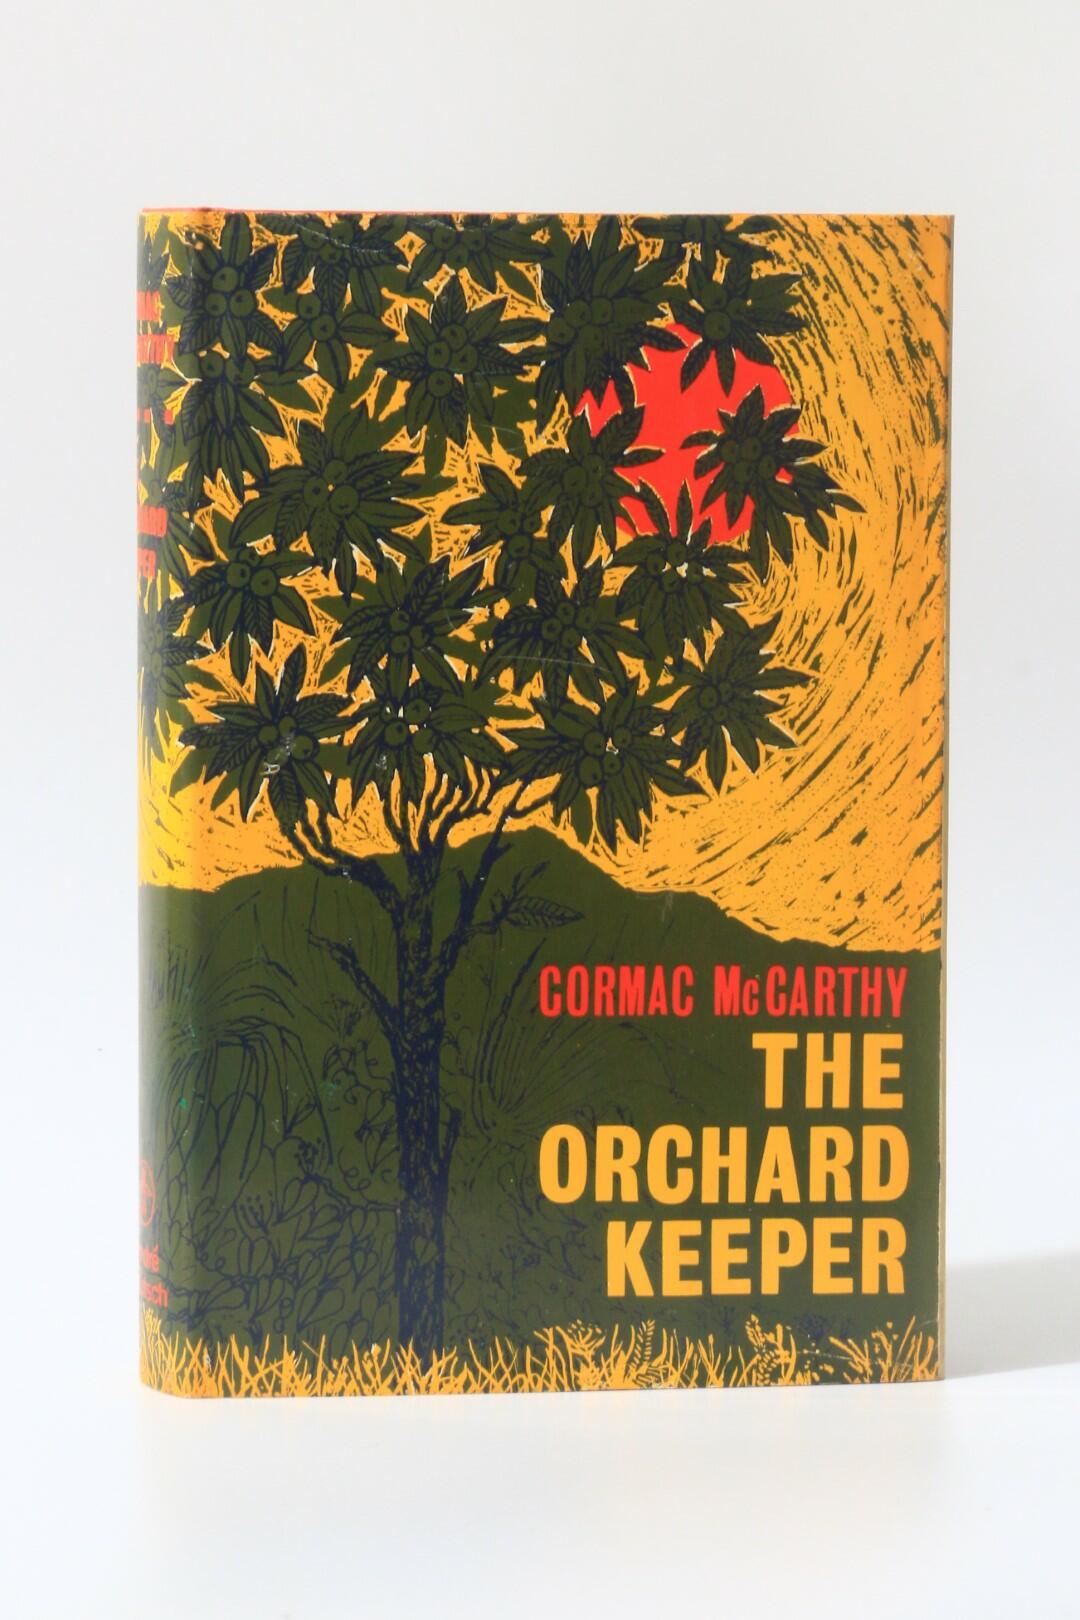 Cormac McCarthy - The Orchard Keeper - Andre Deutsch, 1966, First Edition.